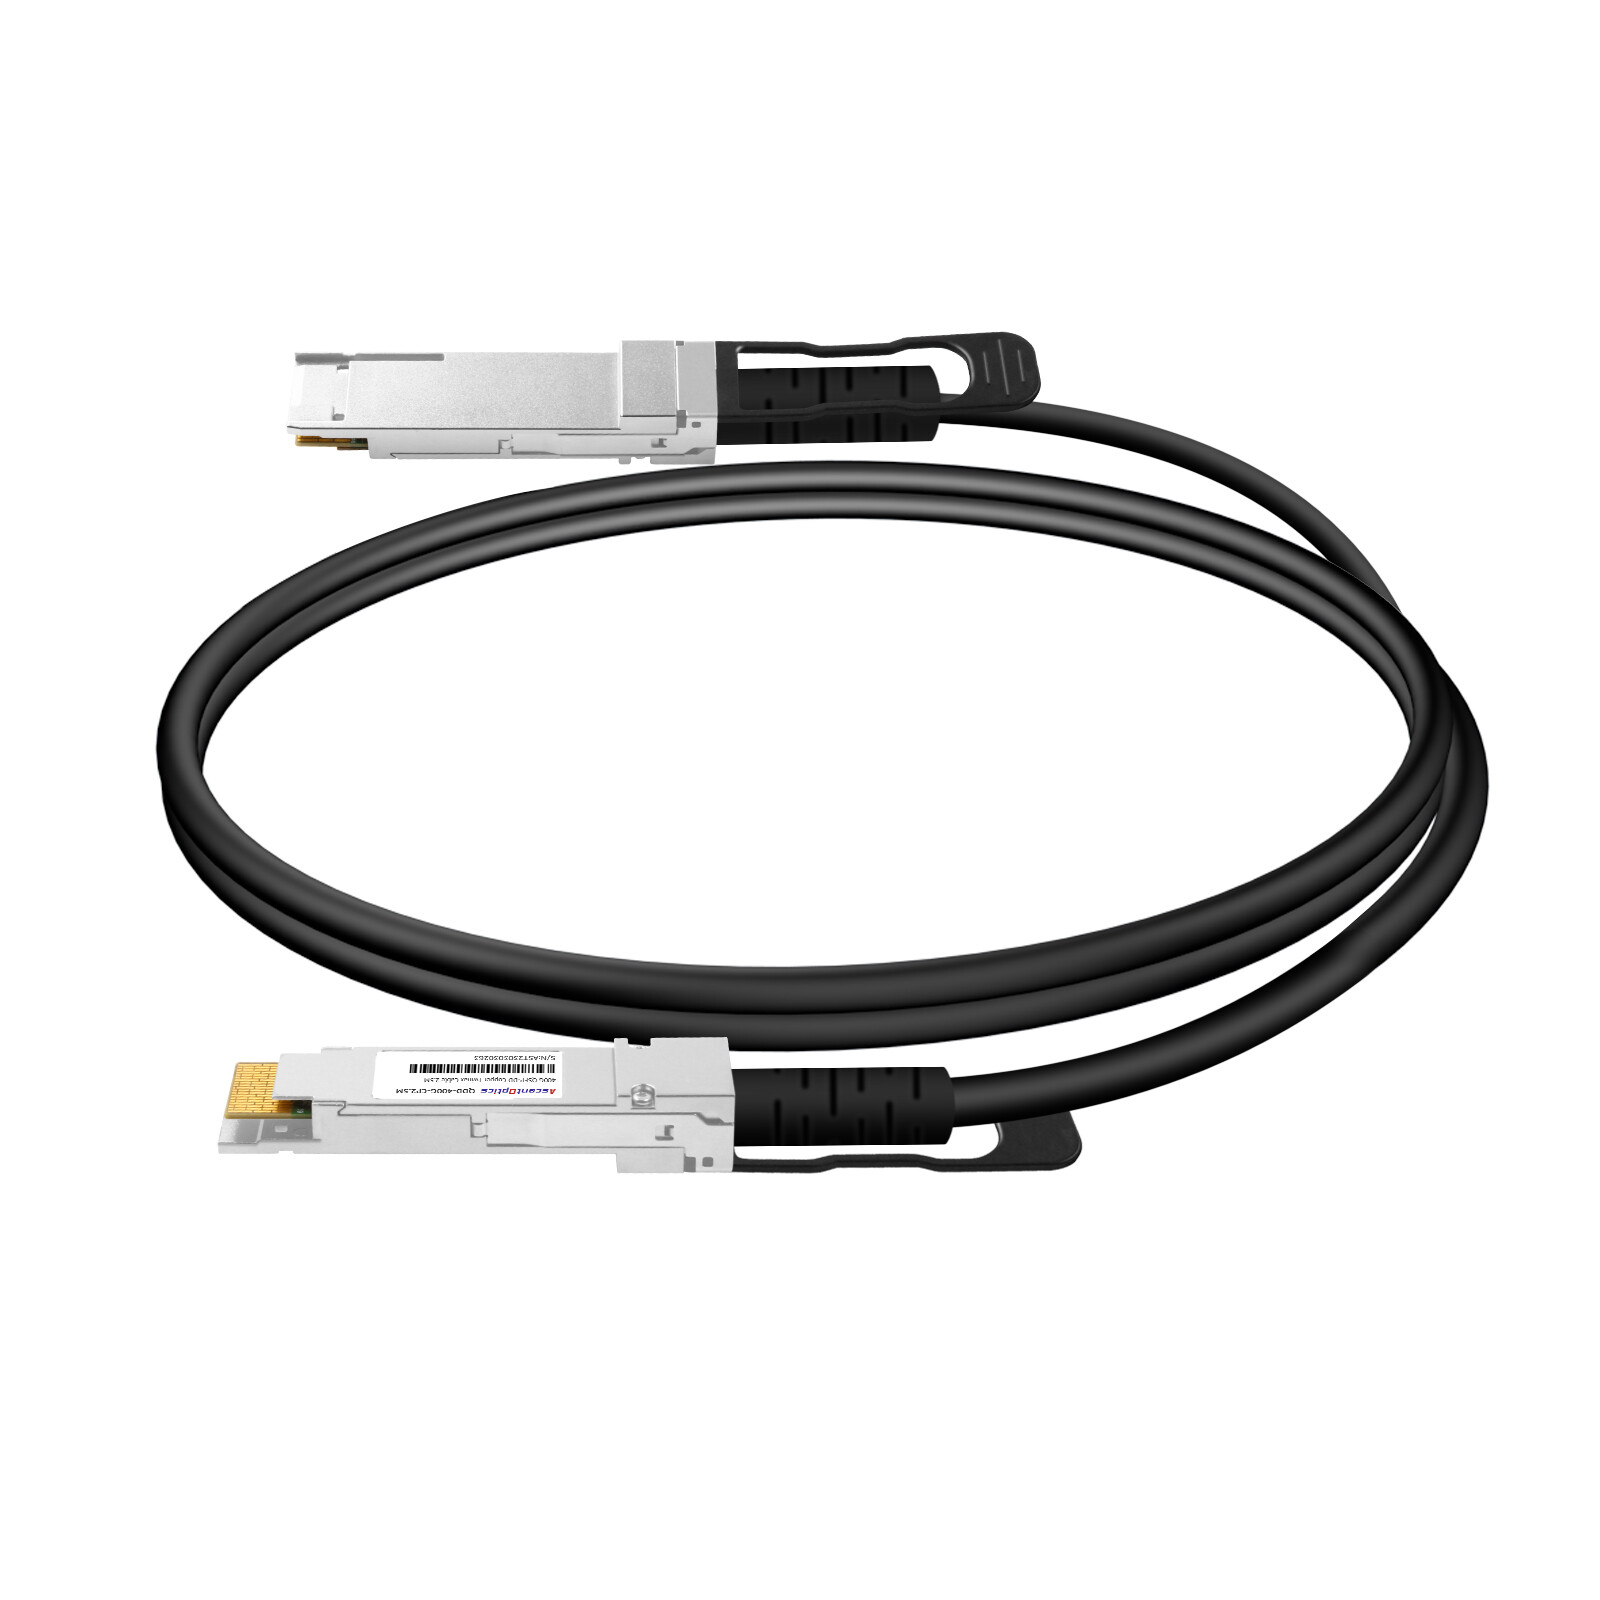 400G QSFP-DD Copper DAC Cable,2.5 Meters,Passive